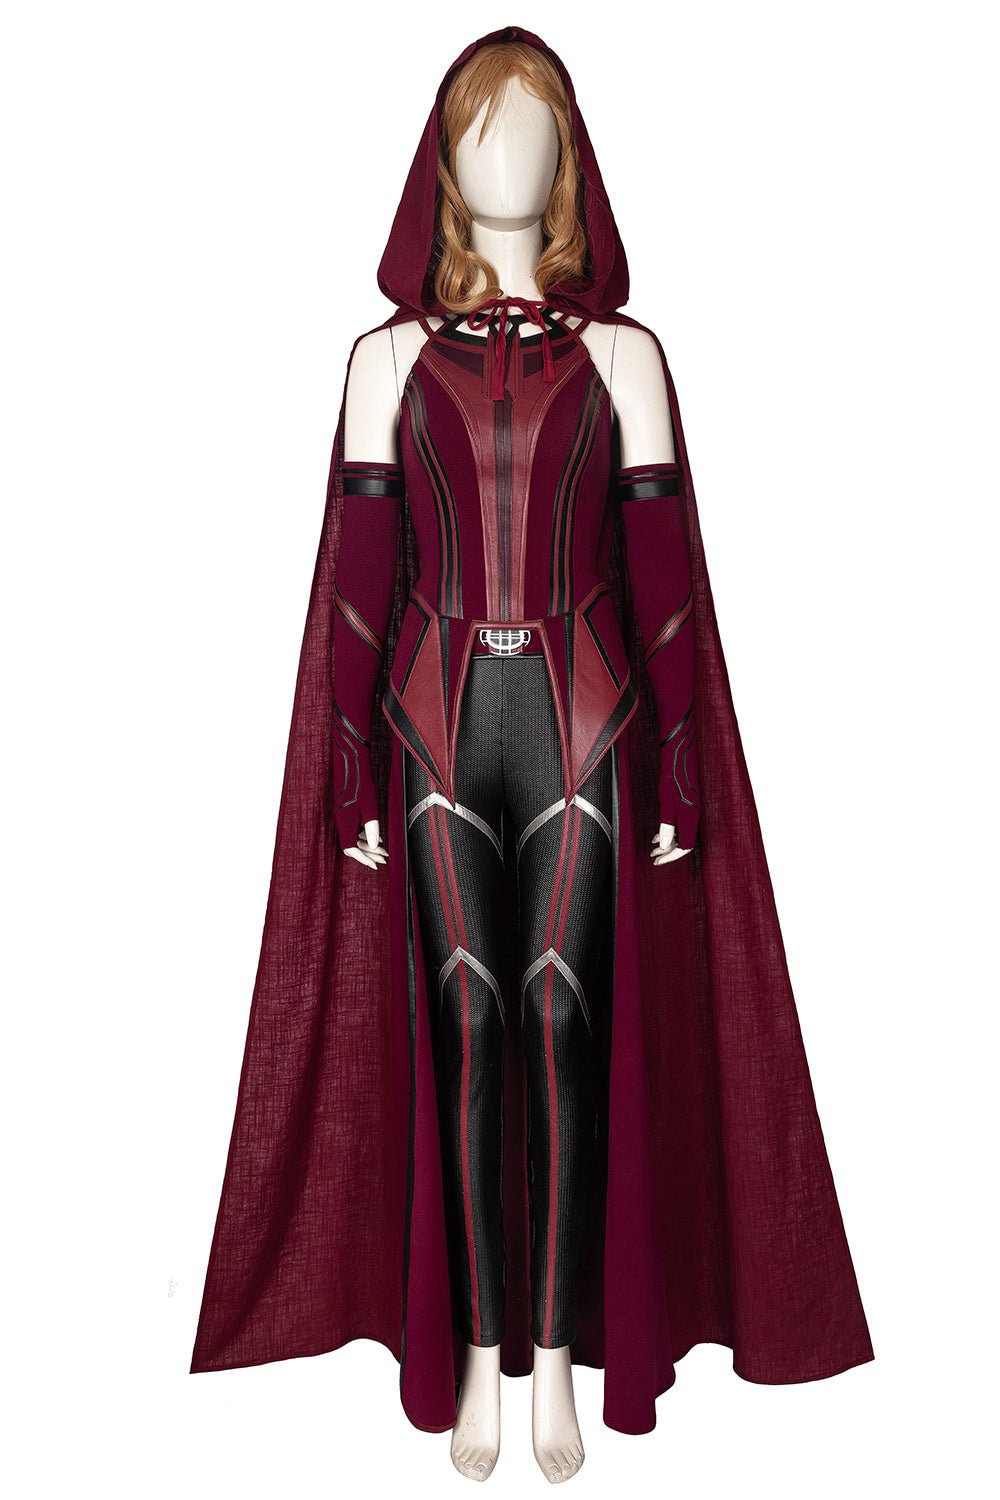 Wanda and vision Vision wandavision marvel avengers Scarlet Witch Wanda Outfit scarlet witch cosplay New Original Maximoff Costume High Quality